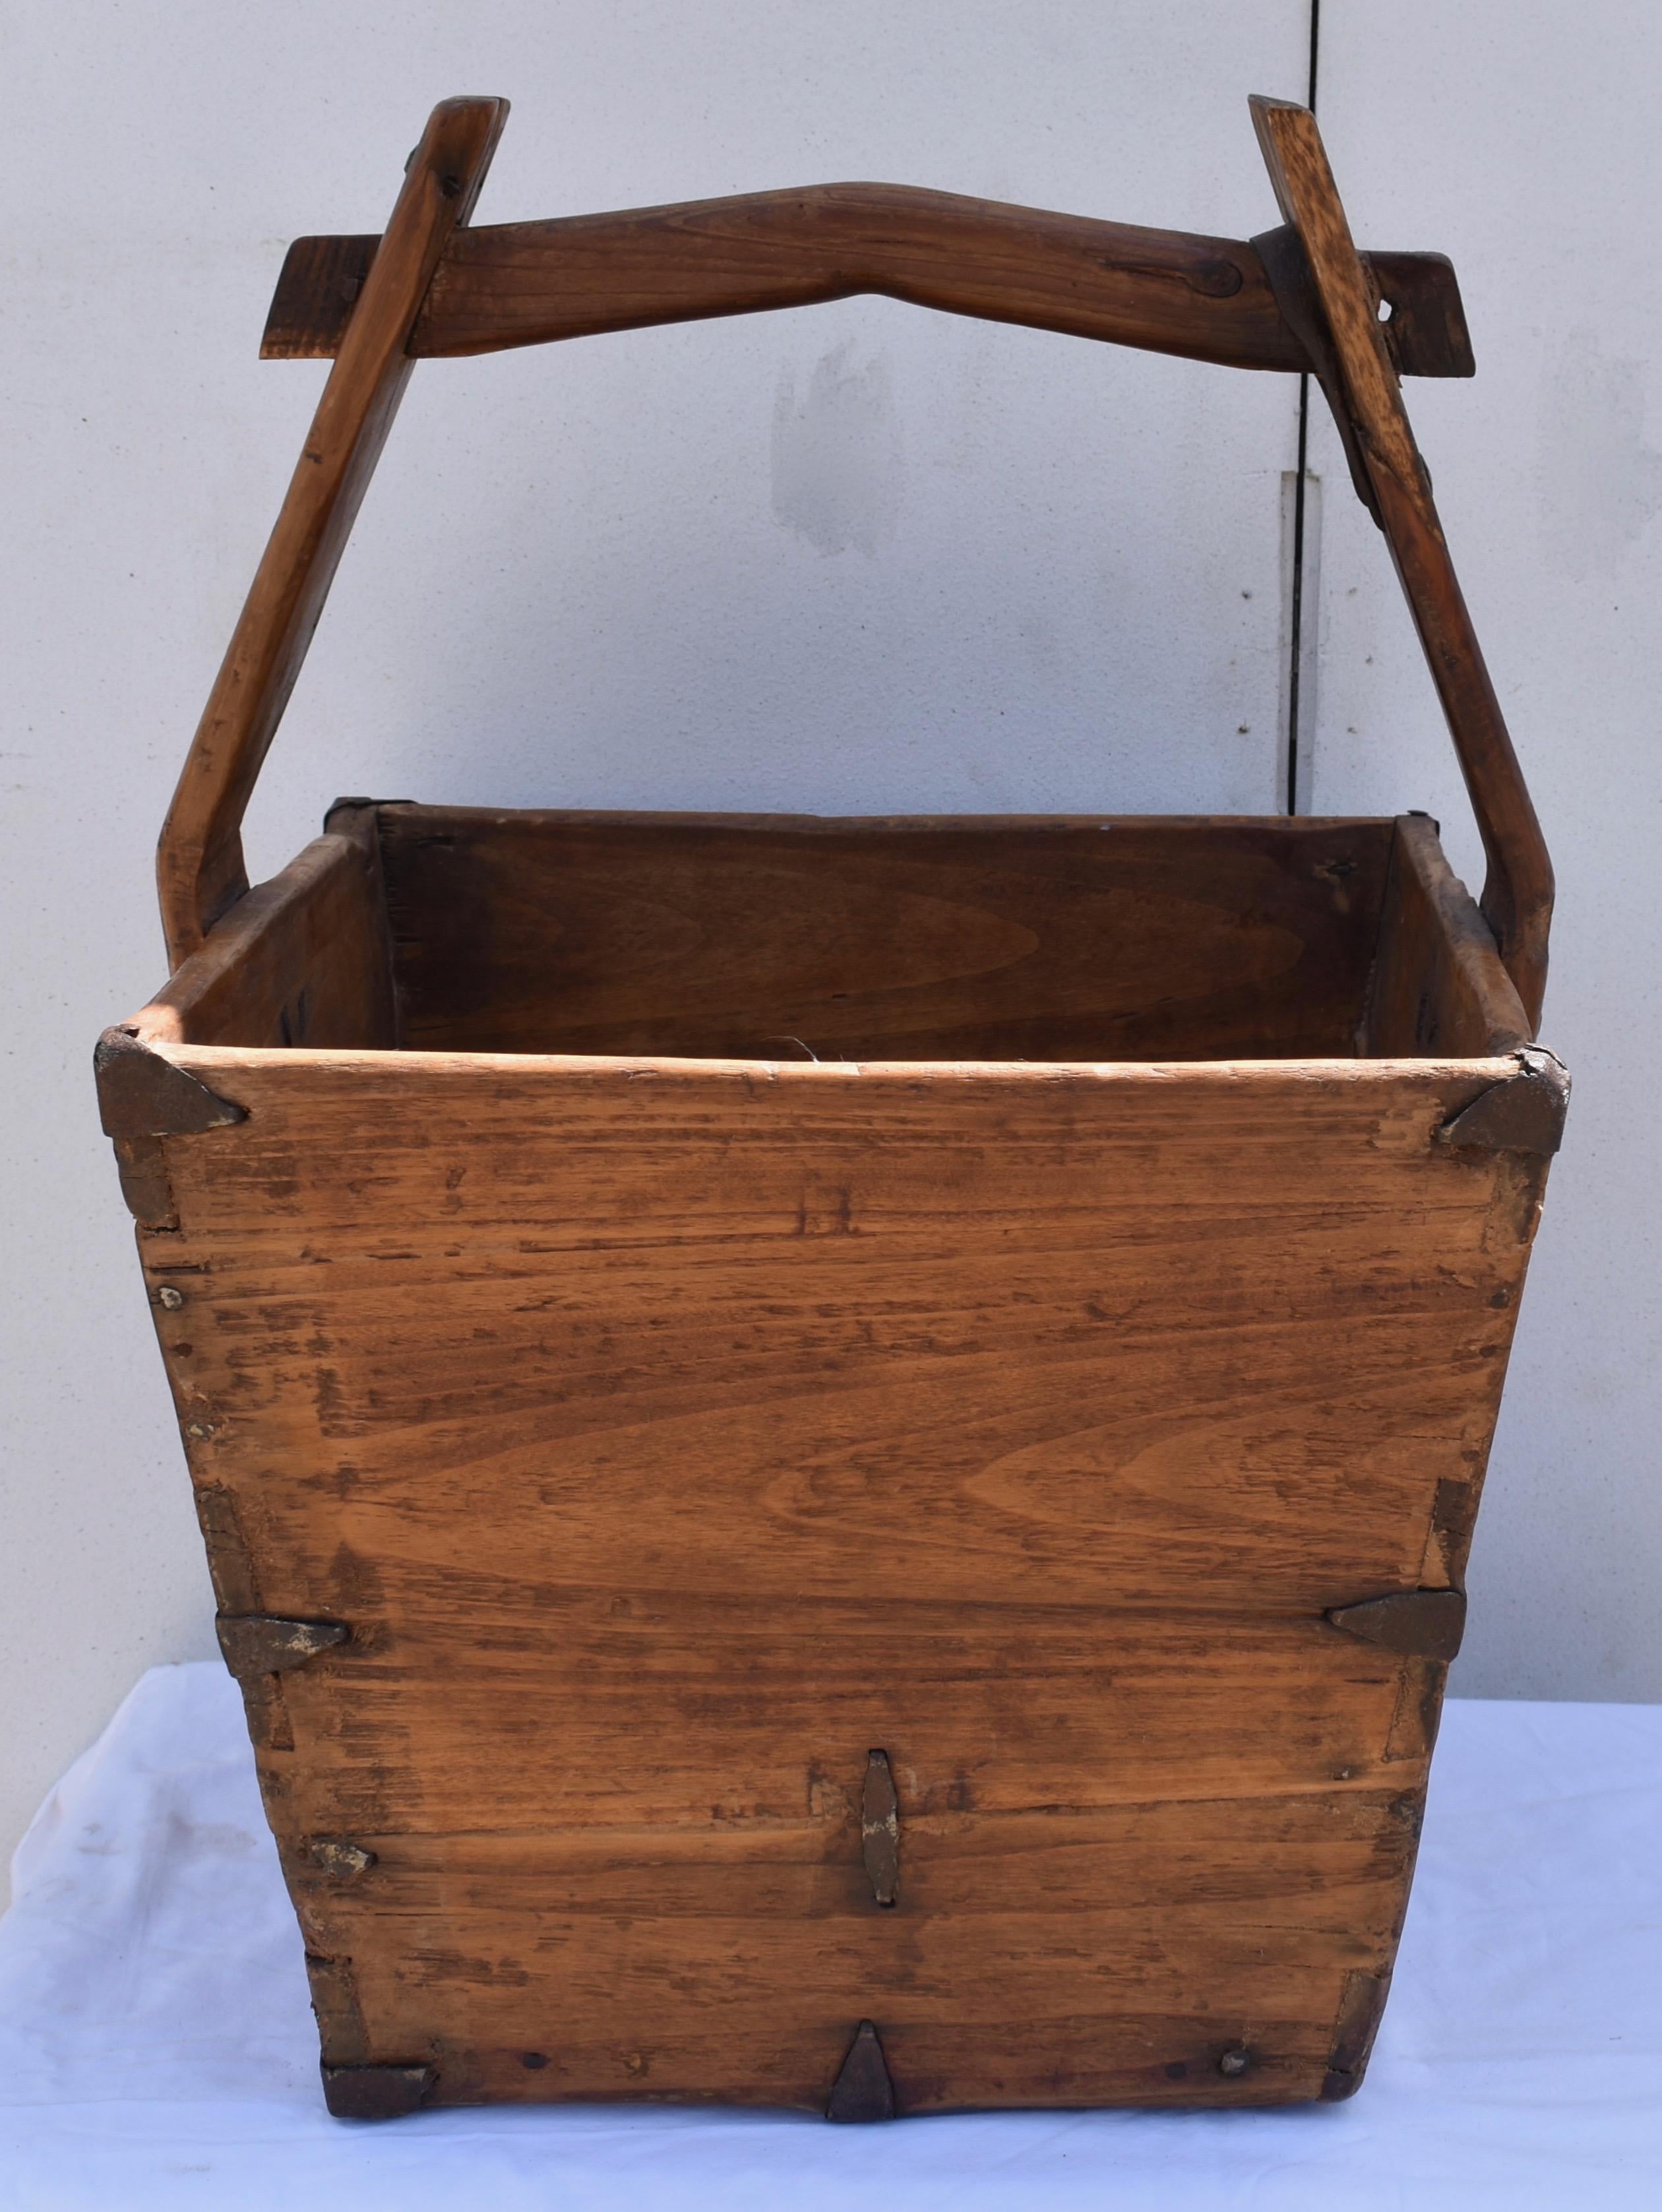 This is an outstanding Chinese dovetailed Elm bucket, used for carrying and measuring rice. The wedge-shaped slatted box has hammered iron reinforcements on the top corners and halfway down each side. They were originally present, on all four bottom